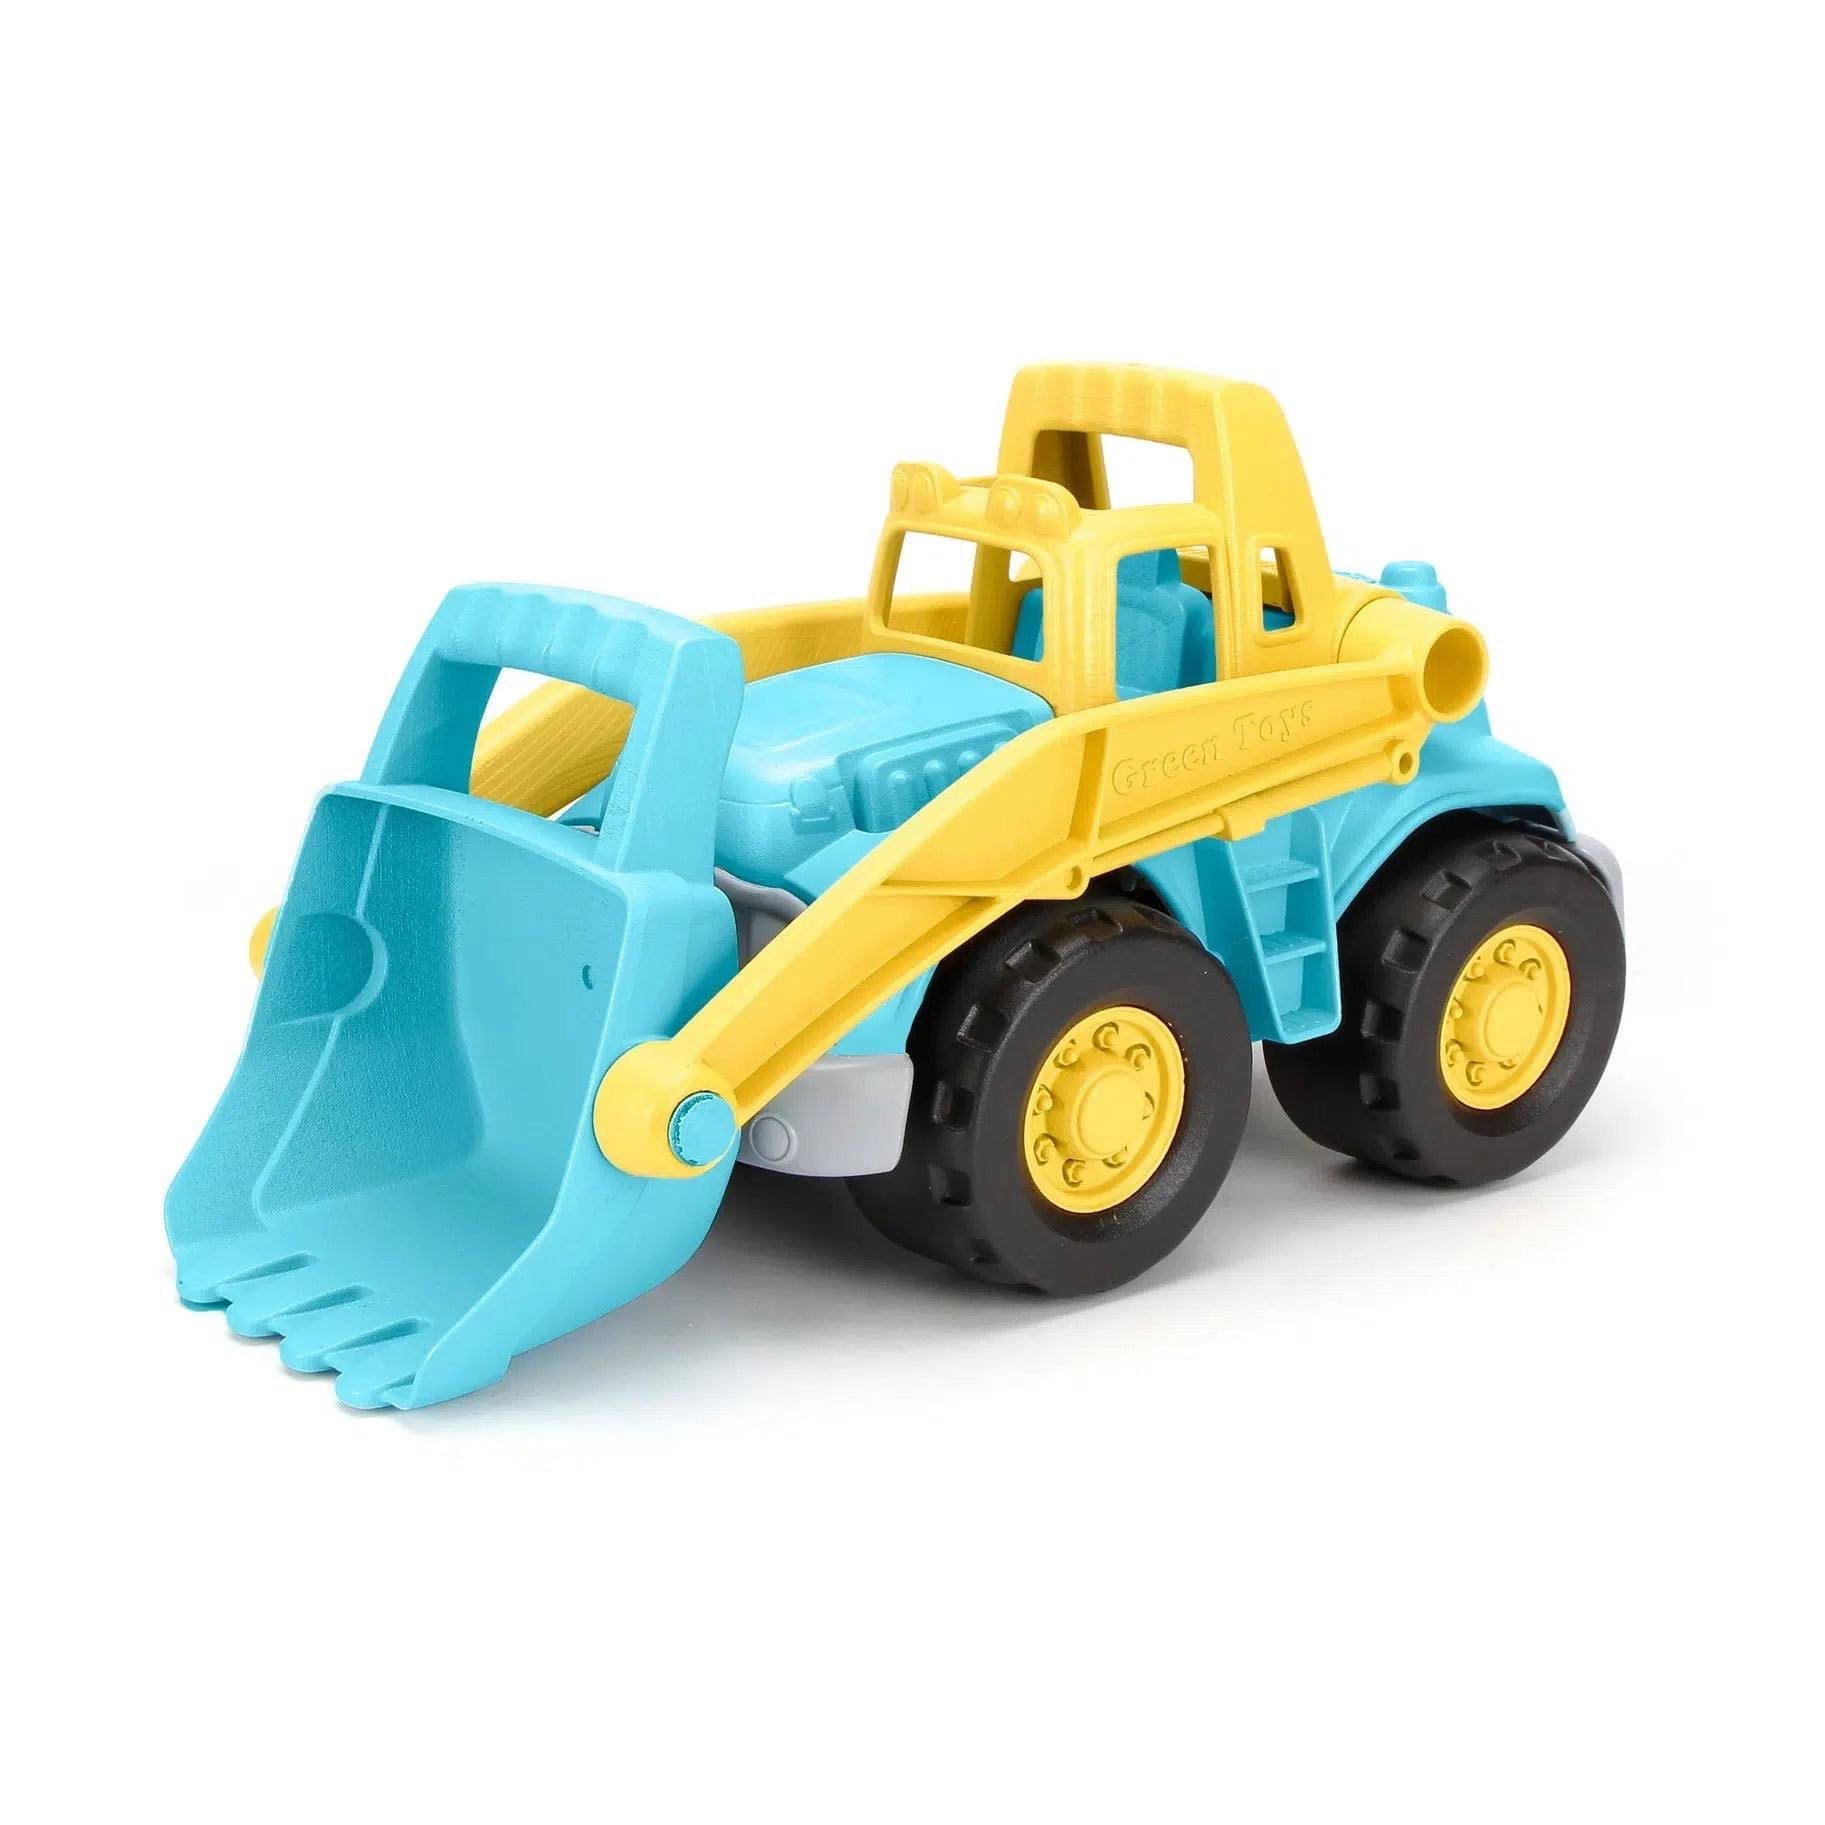 Loader Truck by Green Toys